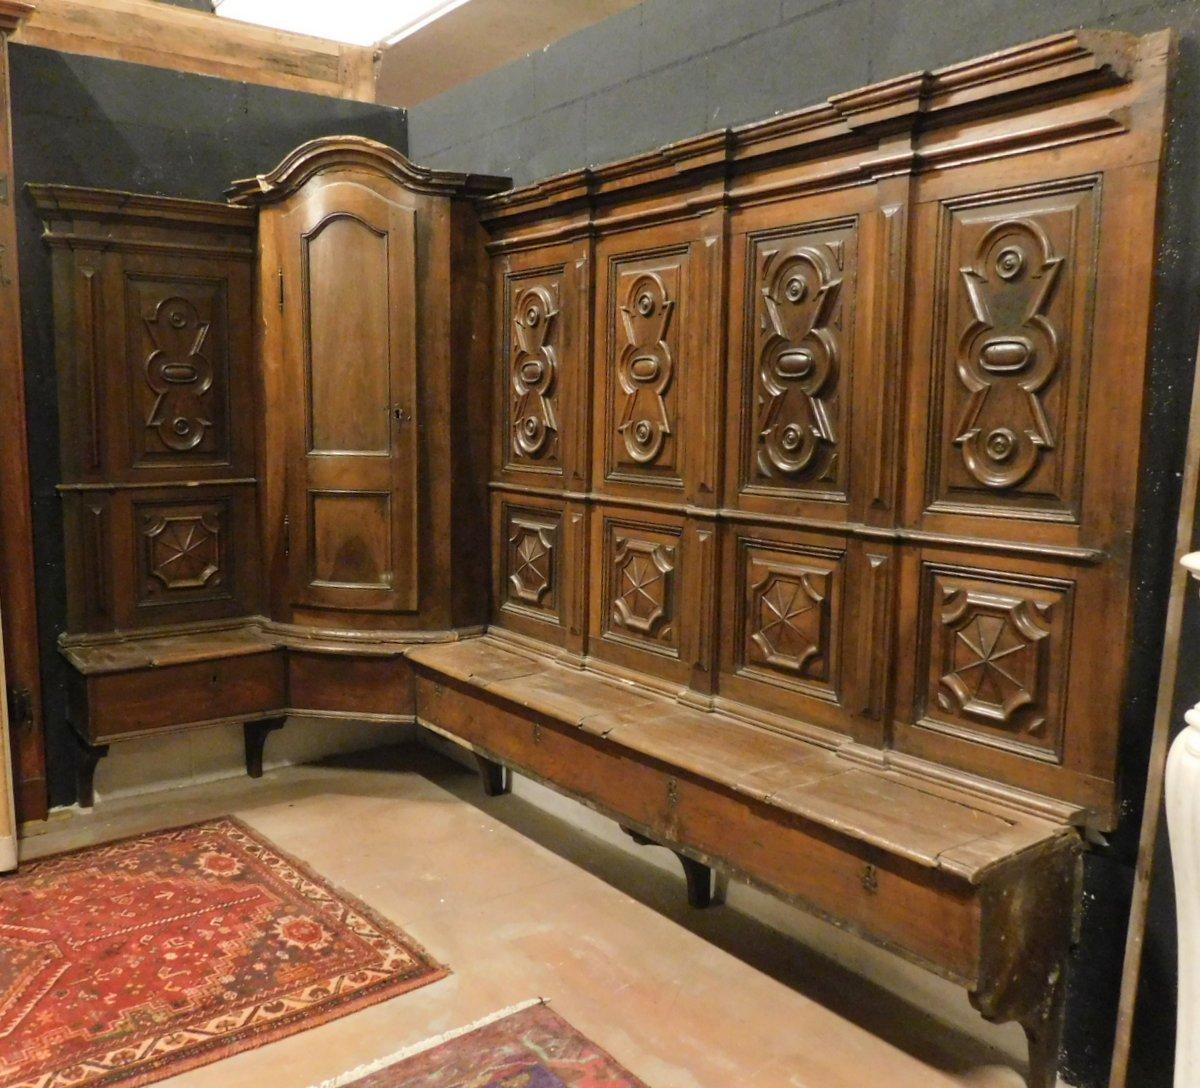 Ancient sacristy choir, with many benches, seats with corner cupboards and opening seats, n. 2 L-shaped bodies, hand-carved with ancient tile, in precious brown walnut wood with a patina due to the centuries, hand-made in the 16th century for a